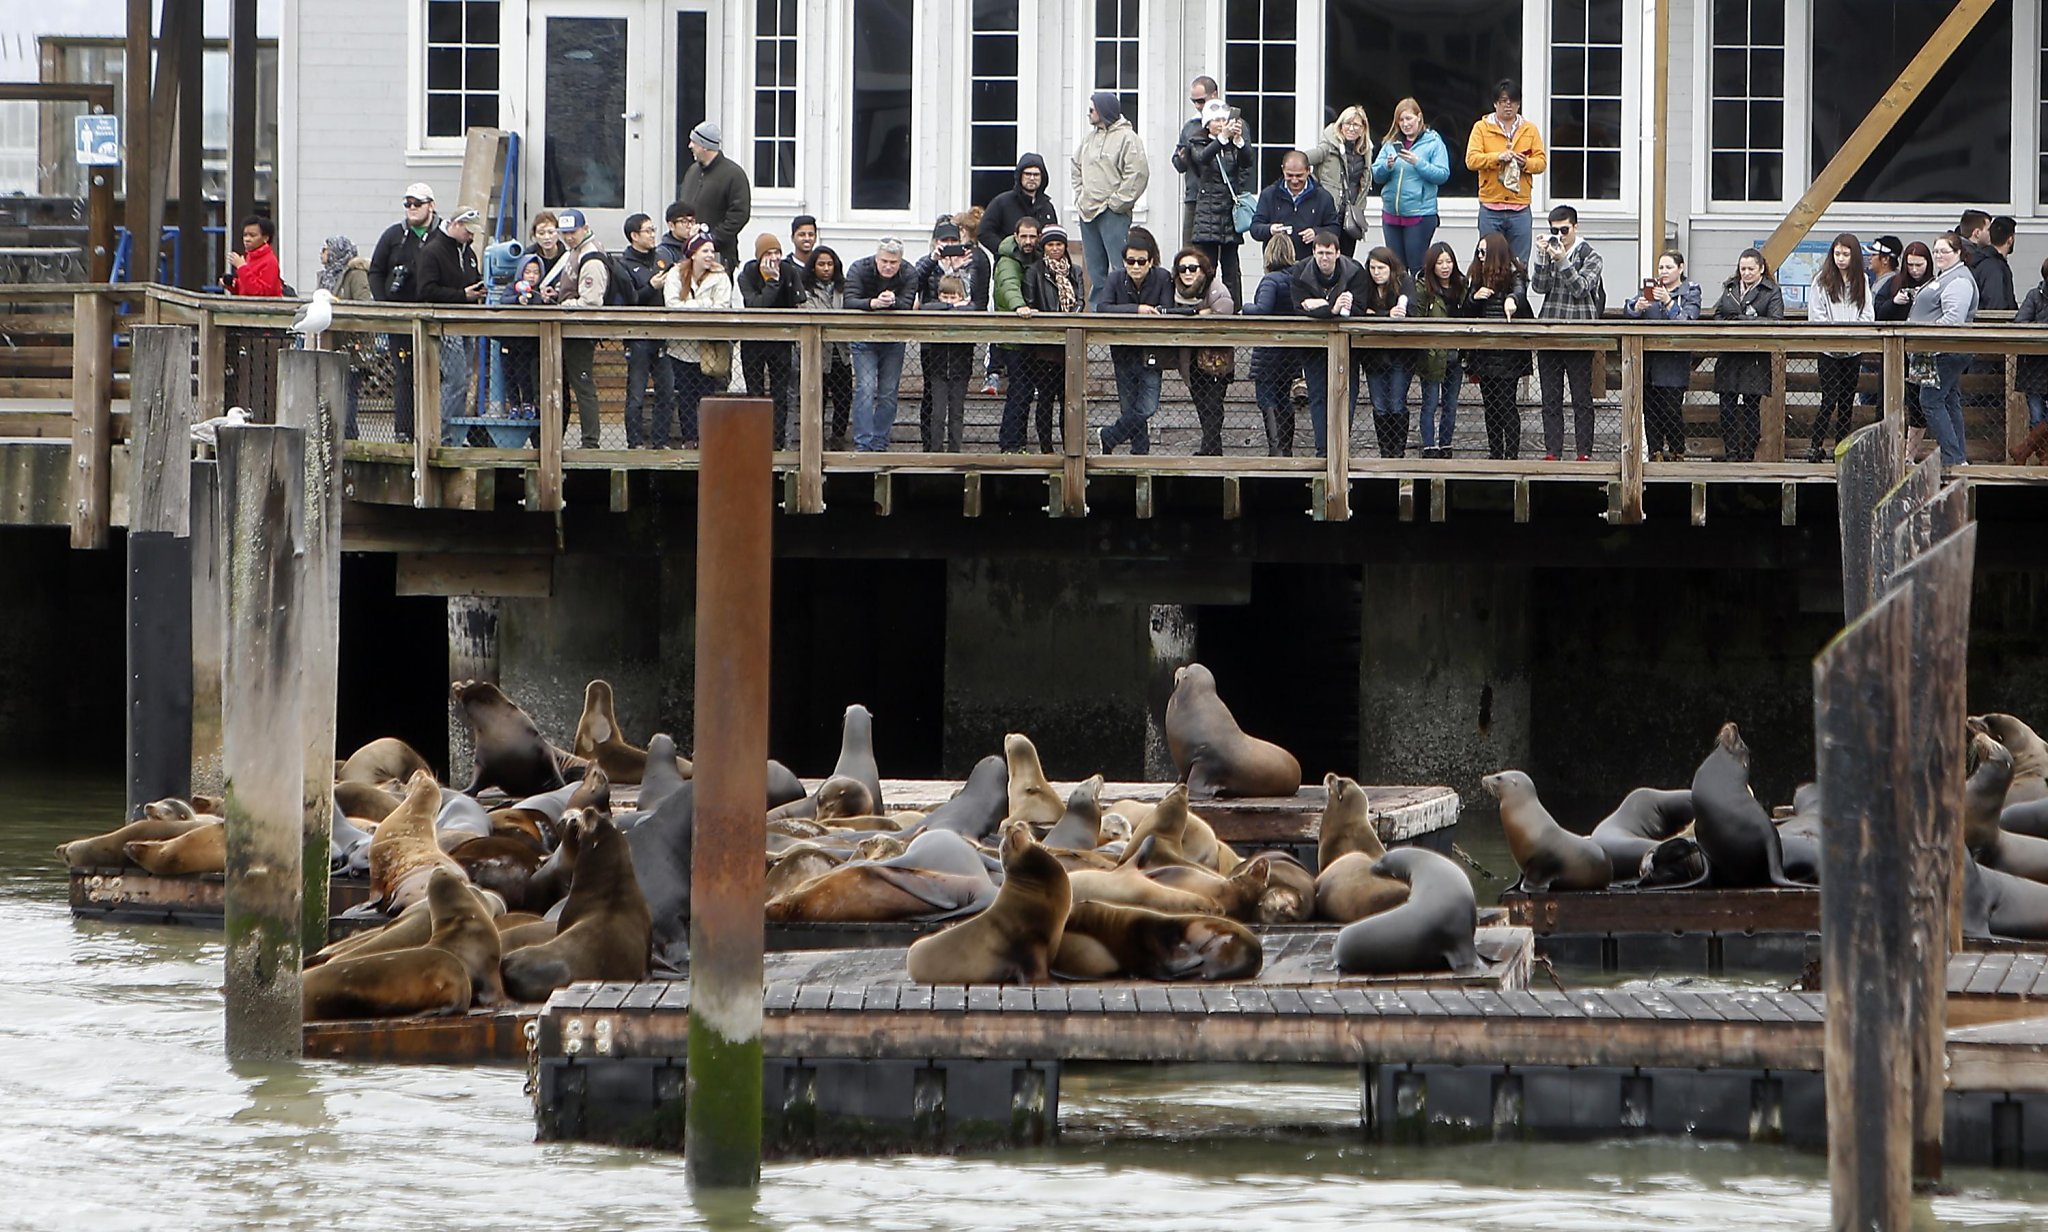 Sea Lions at Pier 39  The Marina, Fisherman's Wharf & the Piers